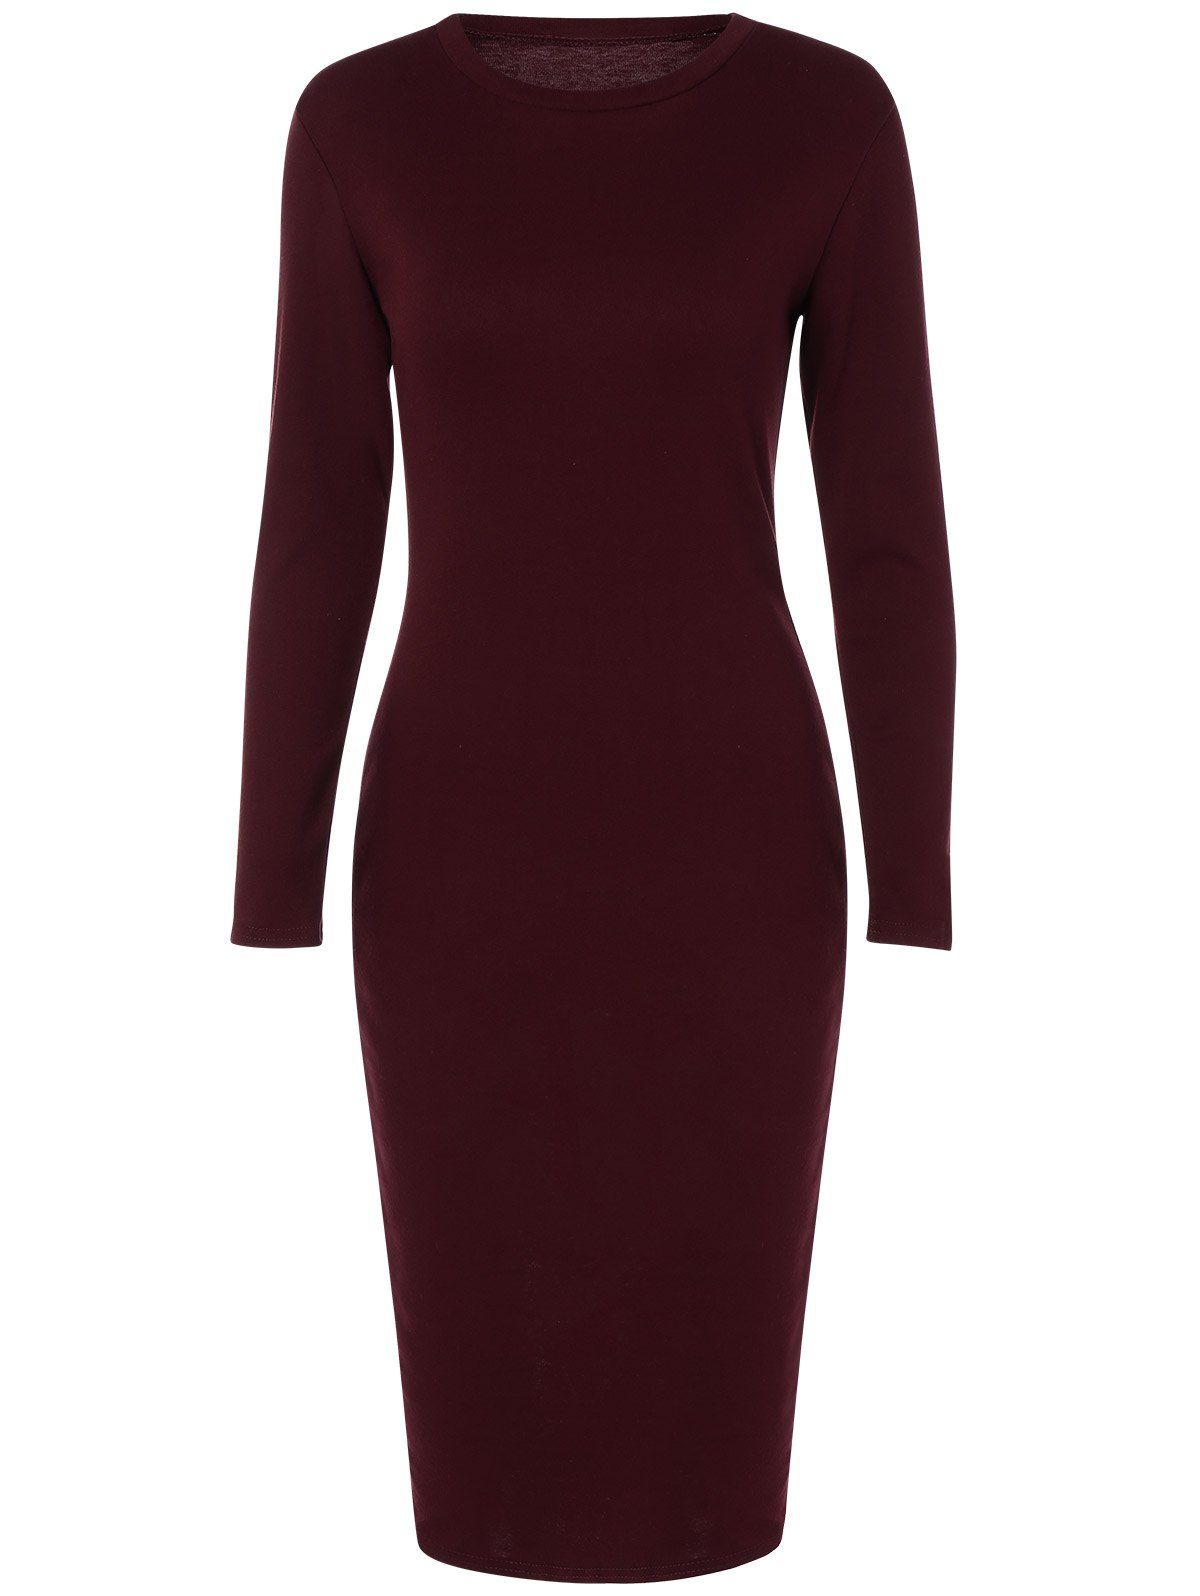 [41% OFF] 2020 Back Slit Tight Fitted Long Sleeve Dress In WINE RED ...